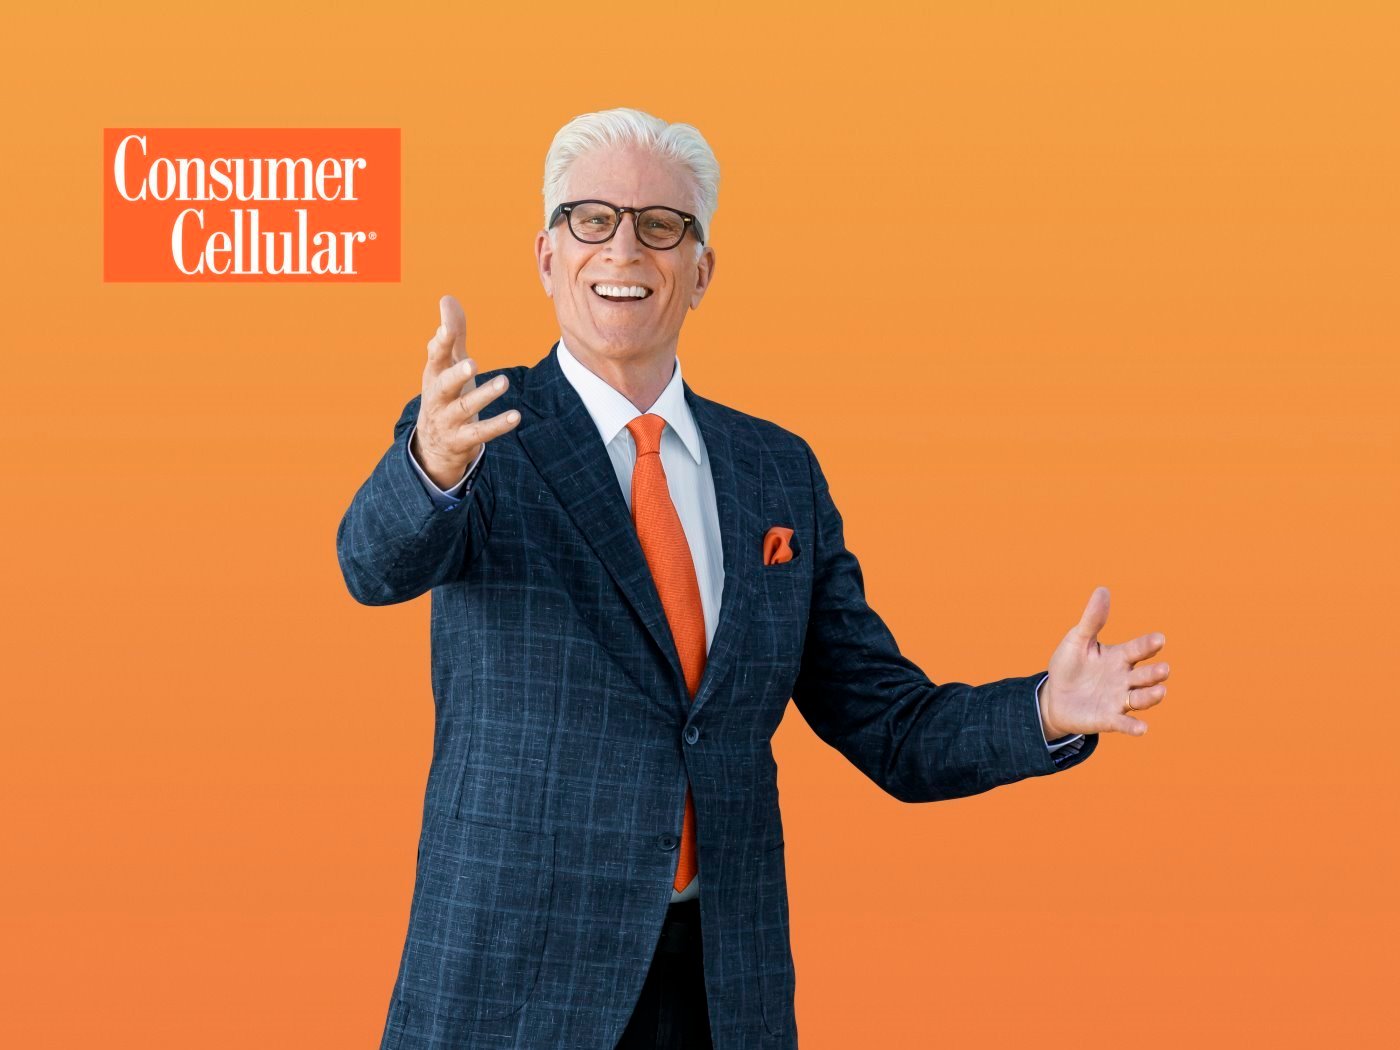 Consumer Cellular Hires Ted Danson To Be Celebrity Spokesperson